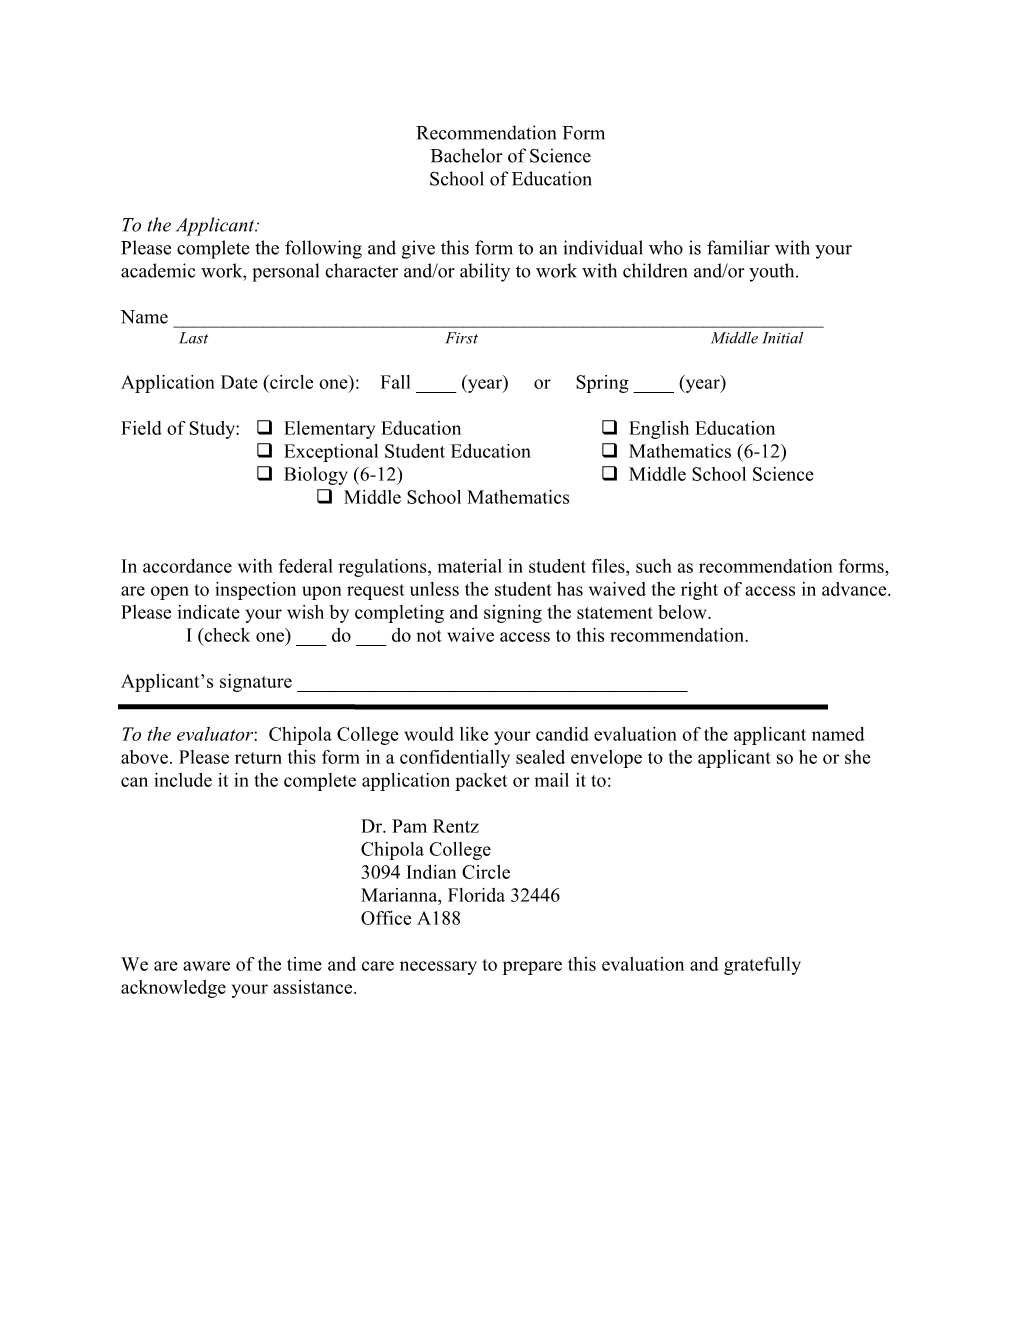 Recommendation Form for the Bachelor of Science